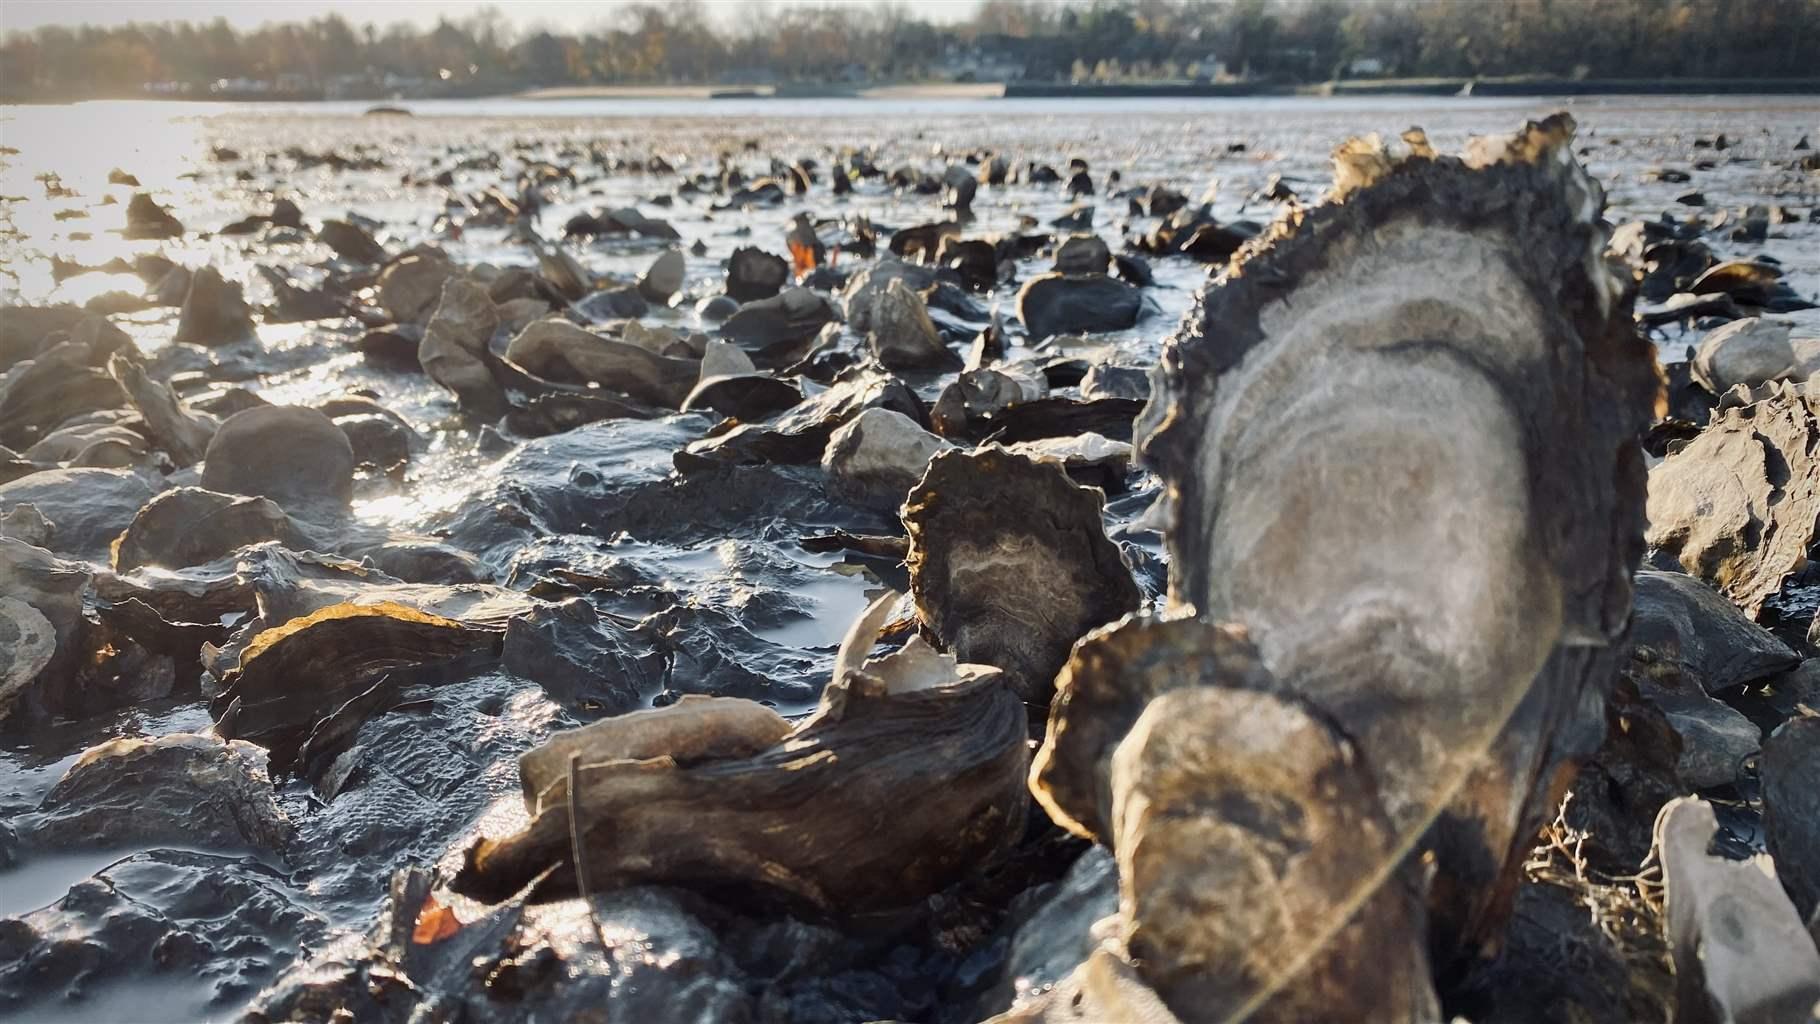 A bed of wild oysters thrives on the shore off of Greenwich, Connecticut.